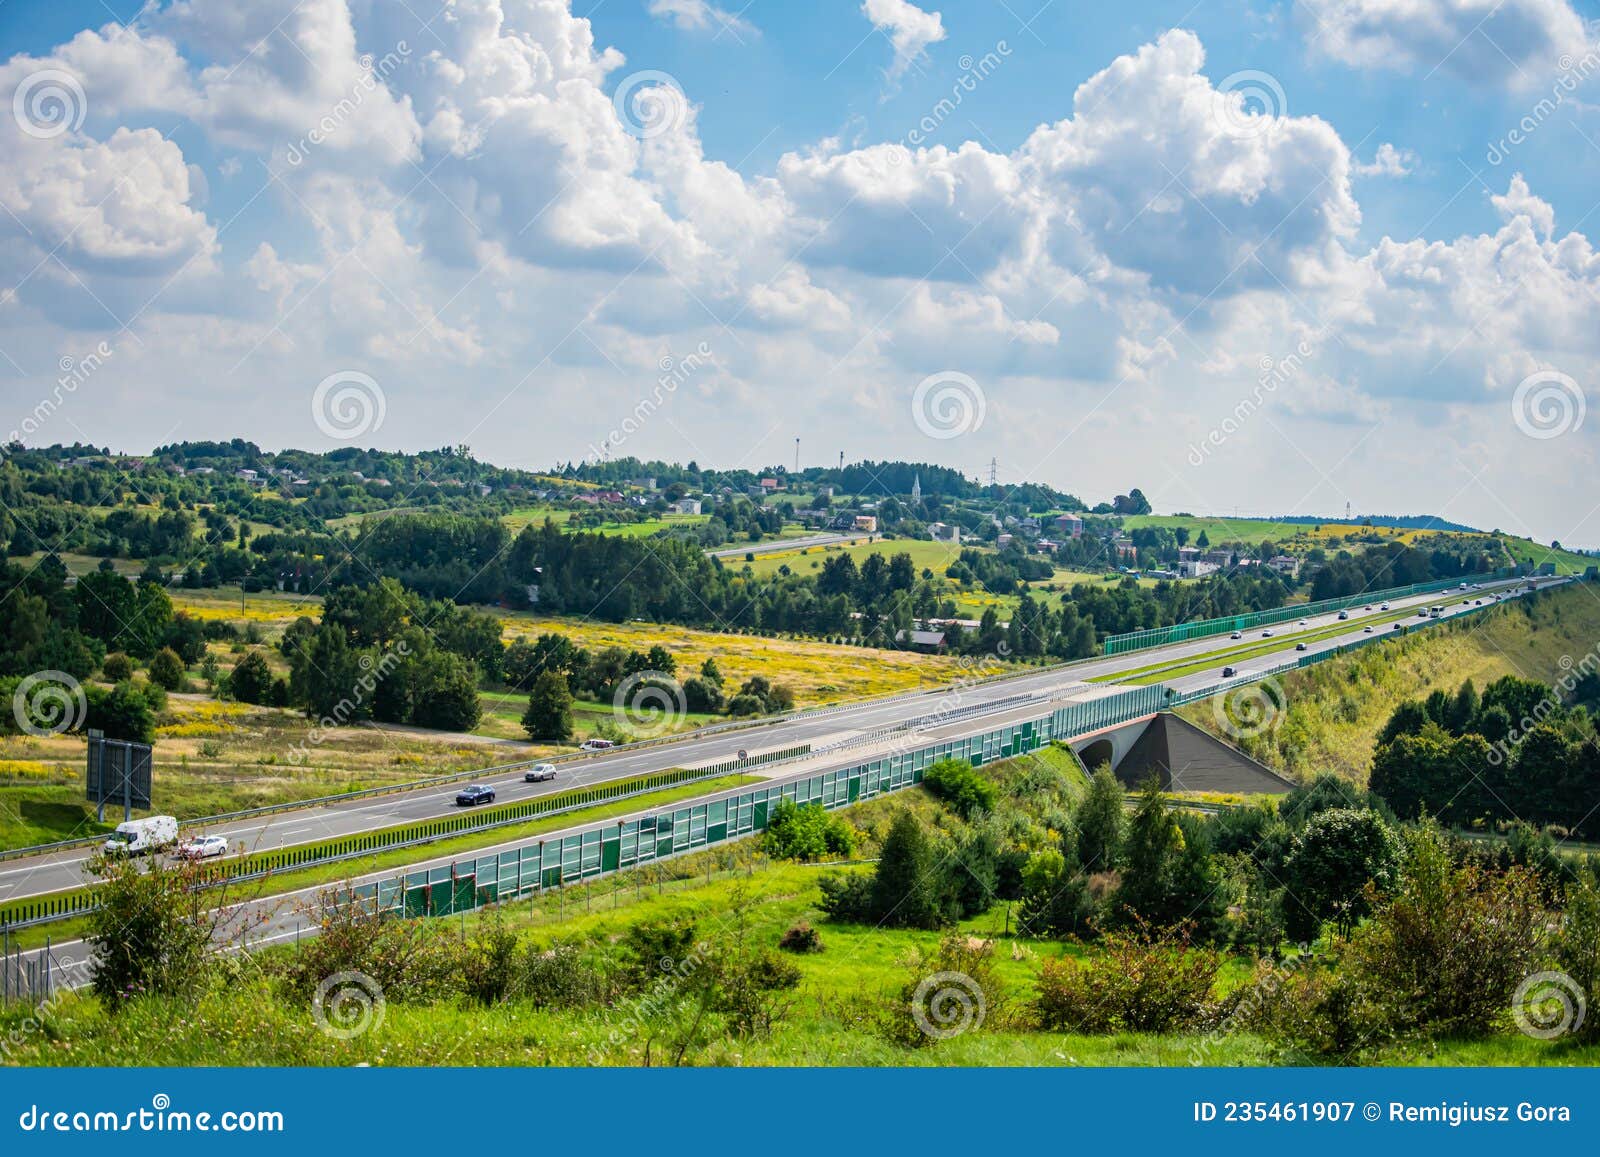 landscape highway, a1 highway north south section pyrzowice - piekary ÃÅ¡lÃâ¦skie